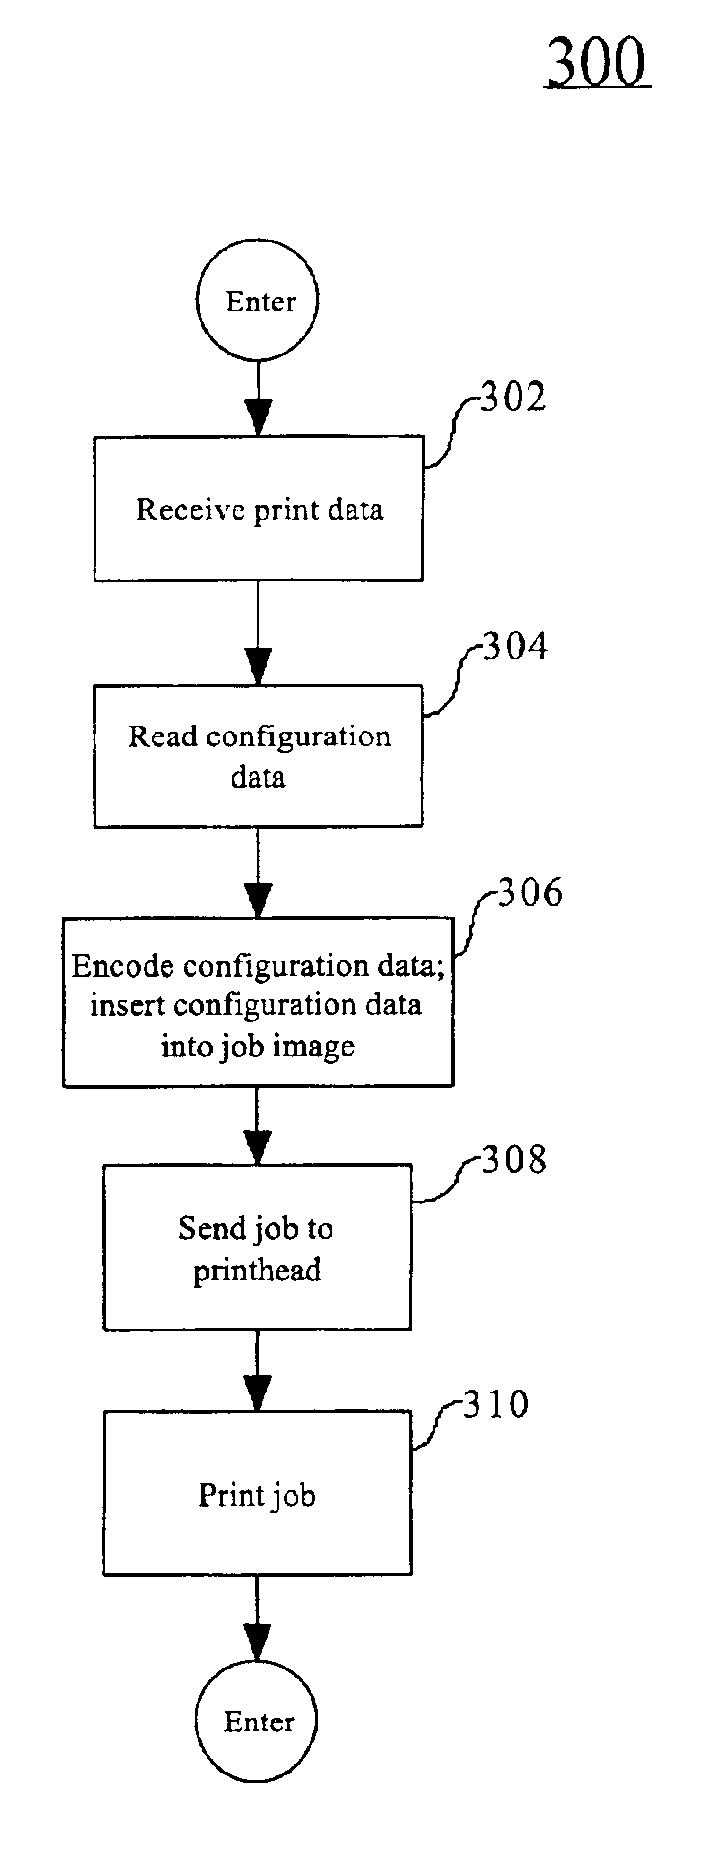 System and method for diagnosing printer problems and notarizing prints by evaluating embedded data